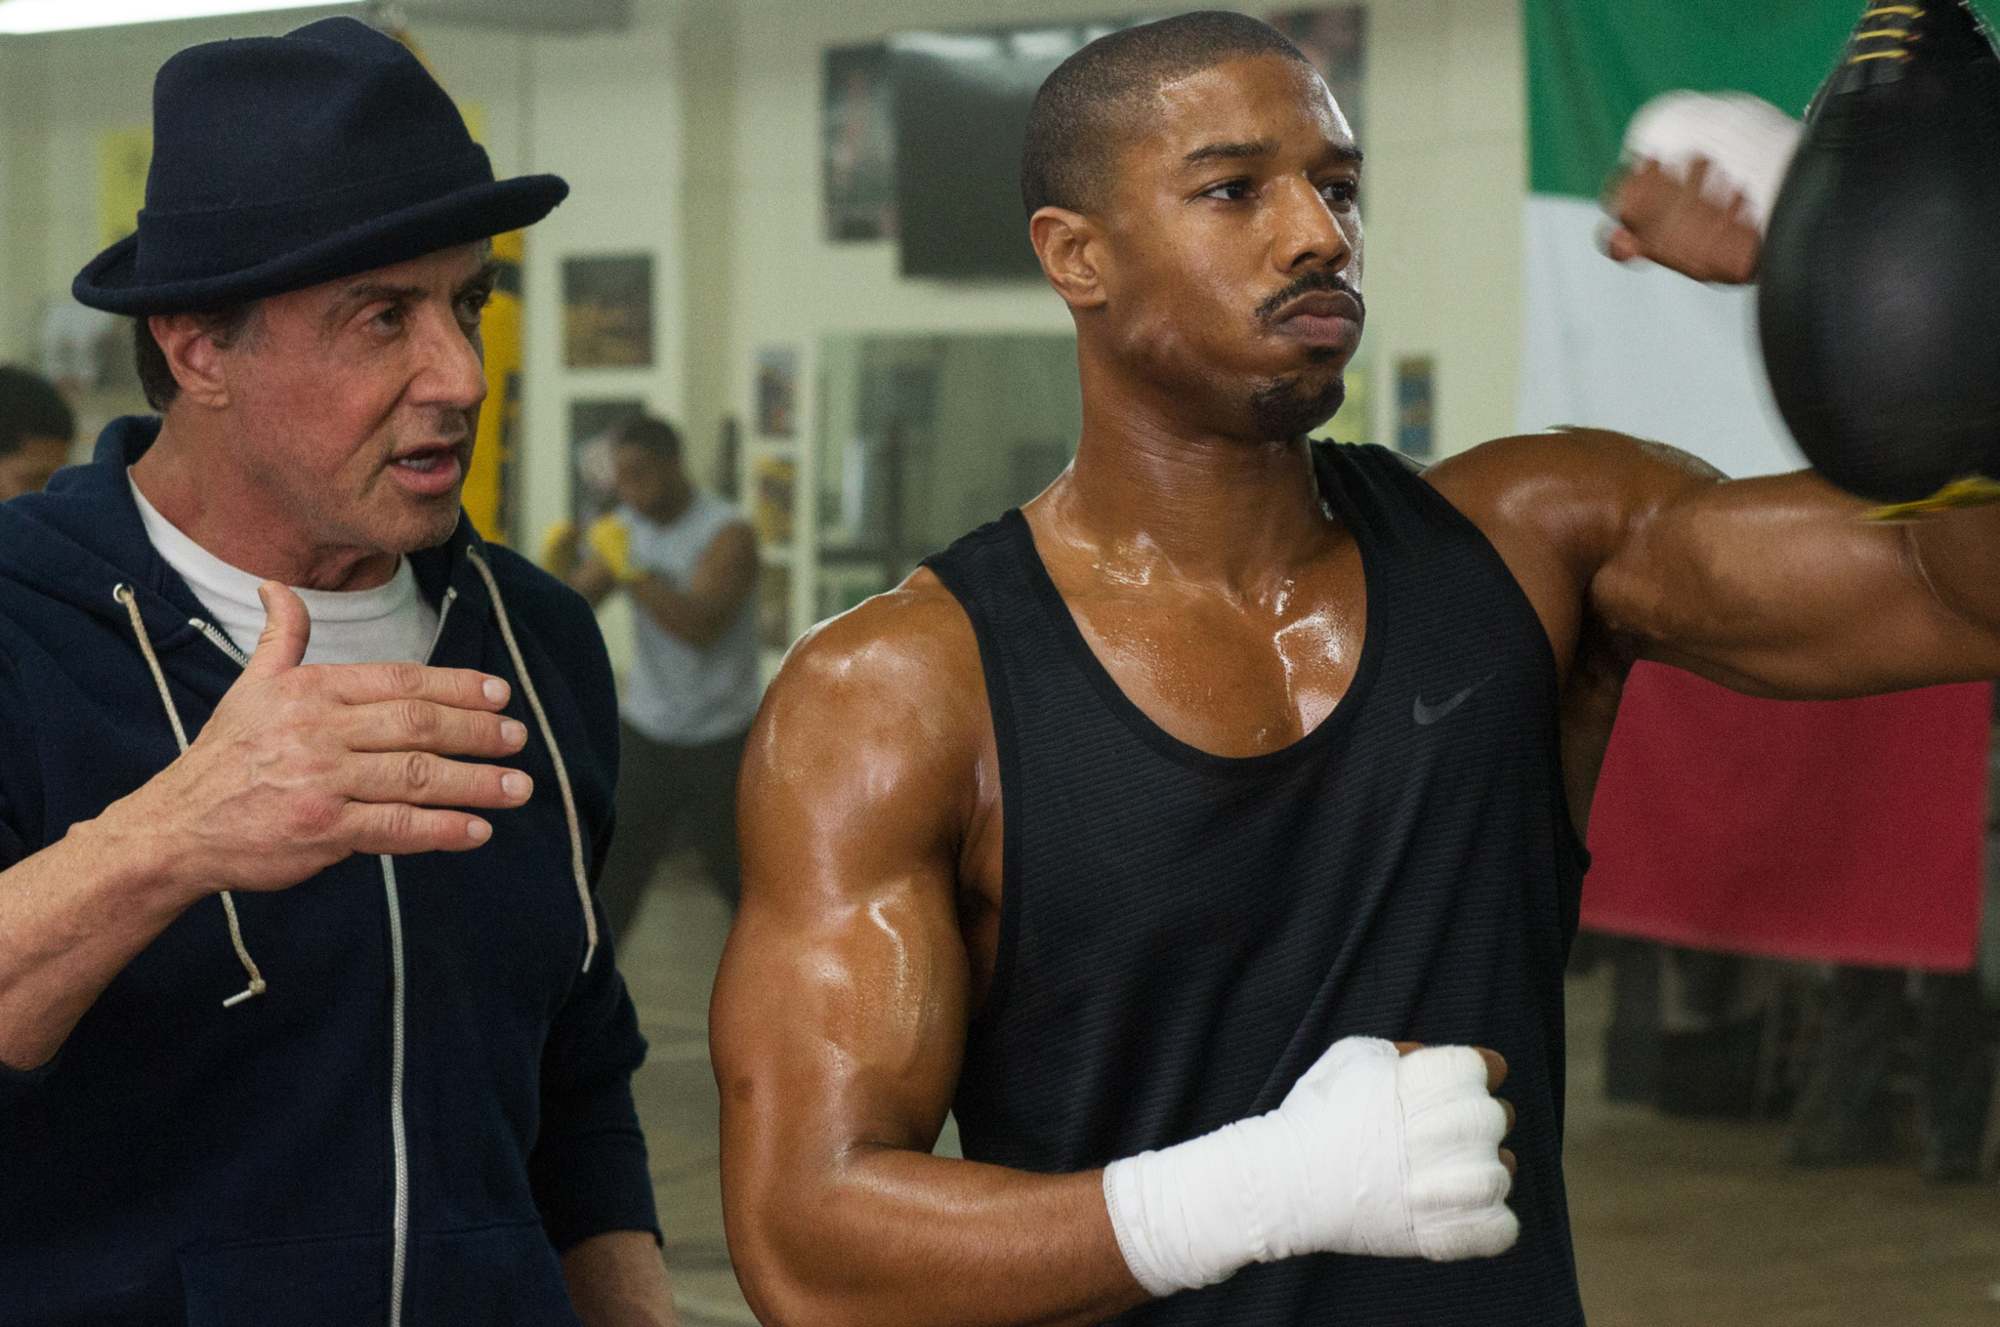 'Creed' Sylvester Stallone as Rocky and Michael B. Jordan as Adonis Creed. Rocky is standing behind Adonis in a boxing gym, punching a hanging bag.